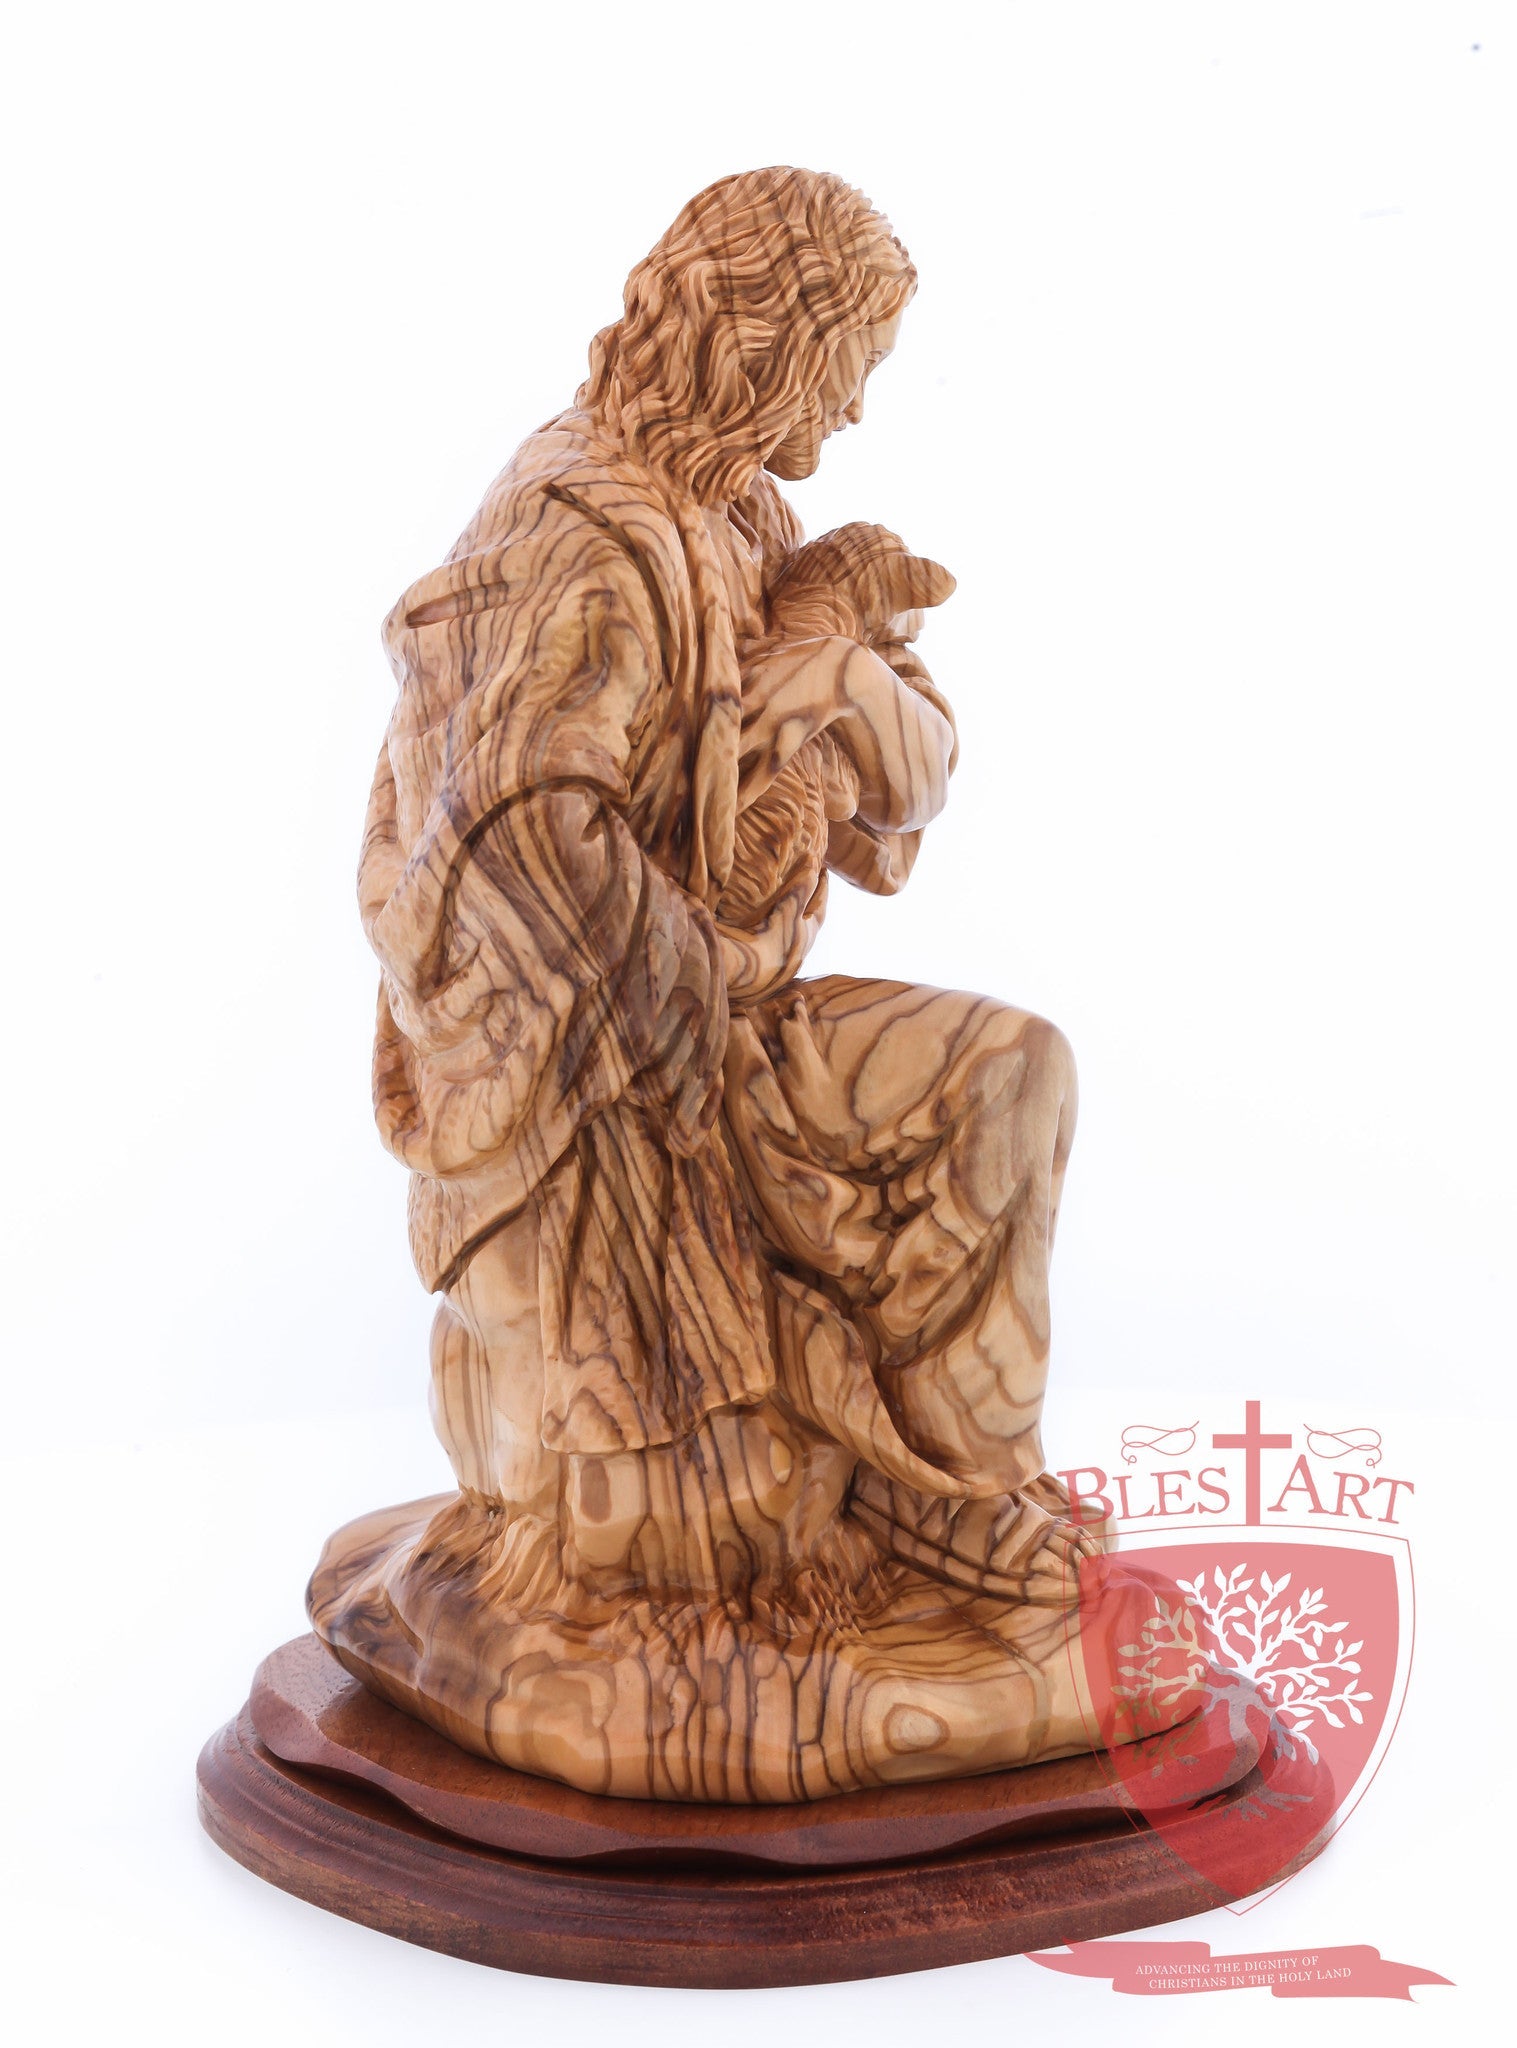 The Good Shepherd, Seated Style, Artistic - Olivewood